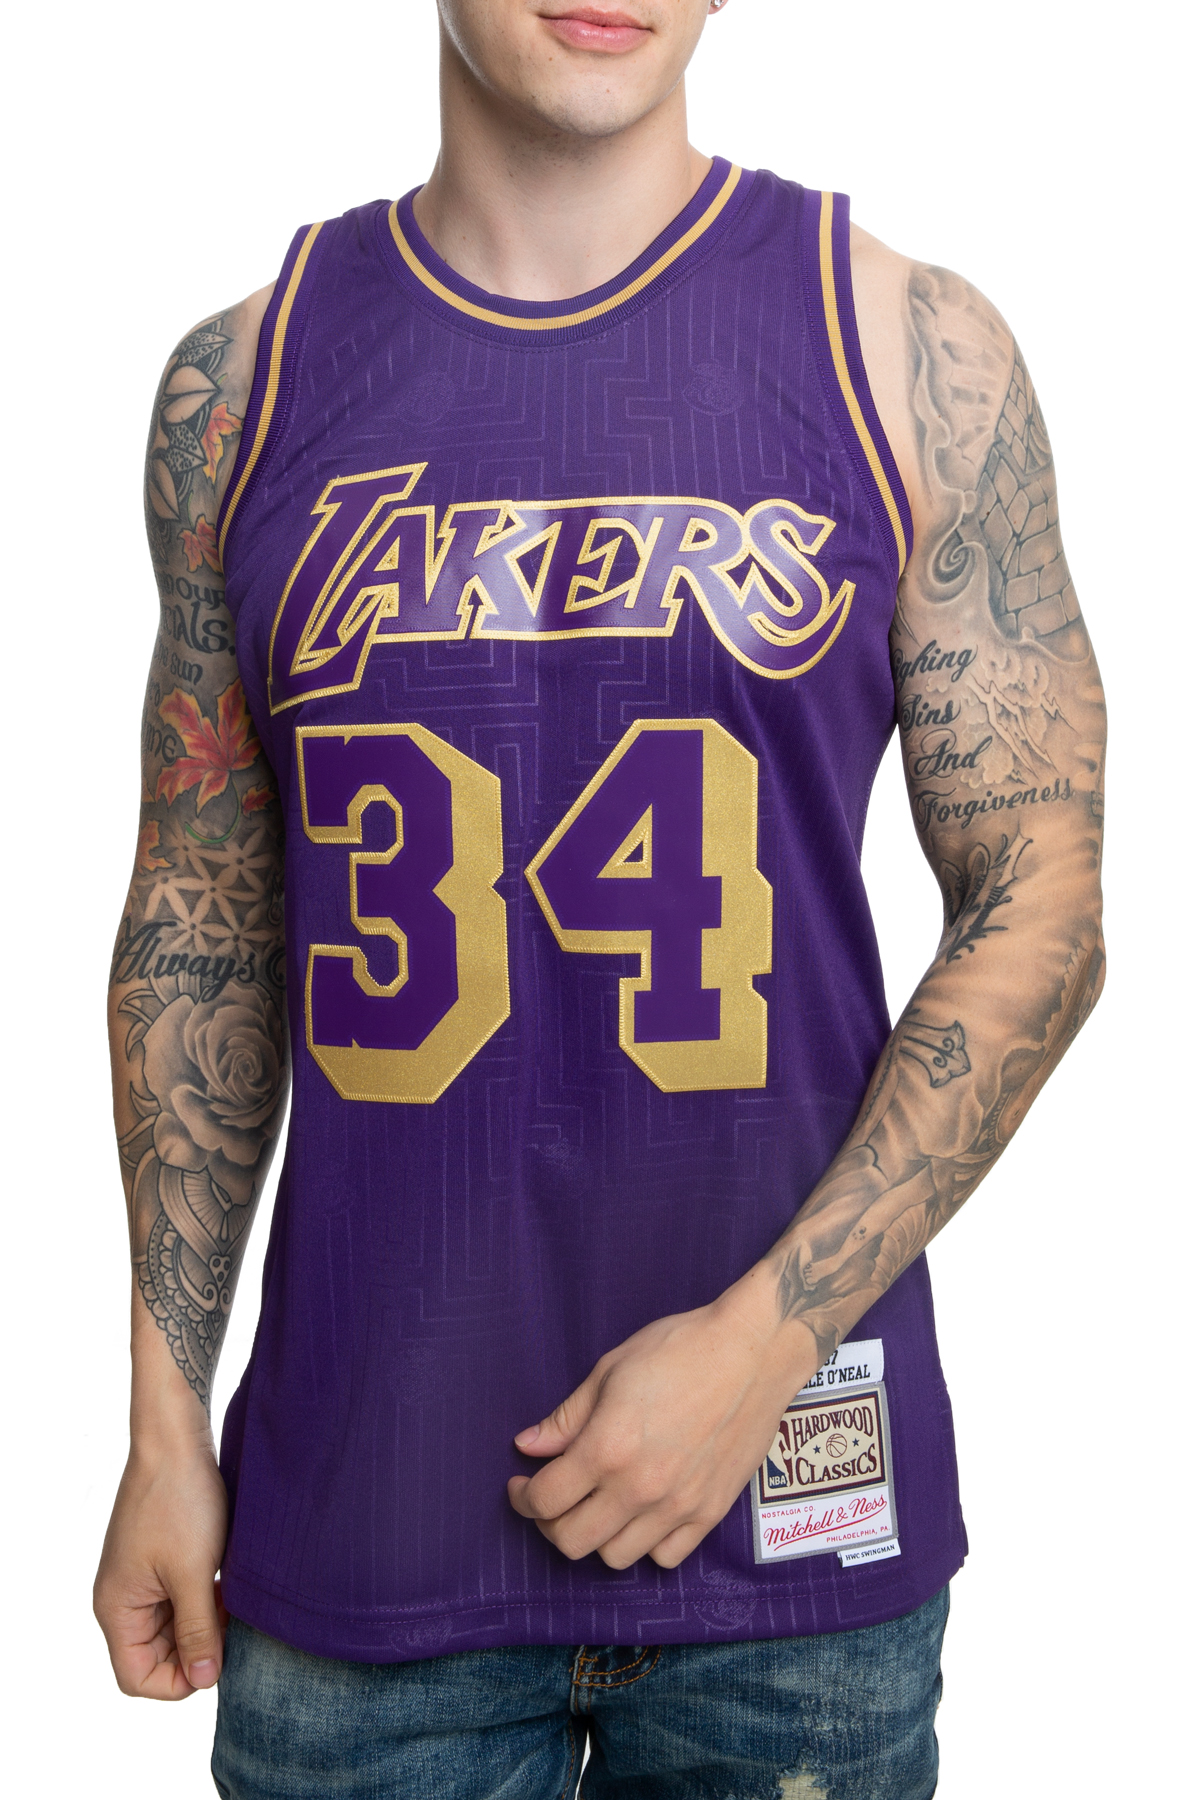 Mitchell & Ness NBA LOS ANGELES LAKERS WOMENS SWINGMAN SHAQUILLE